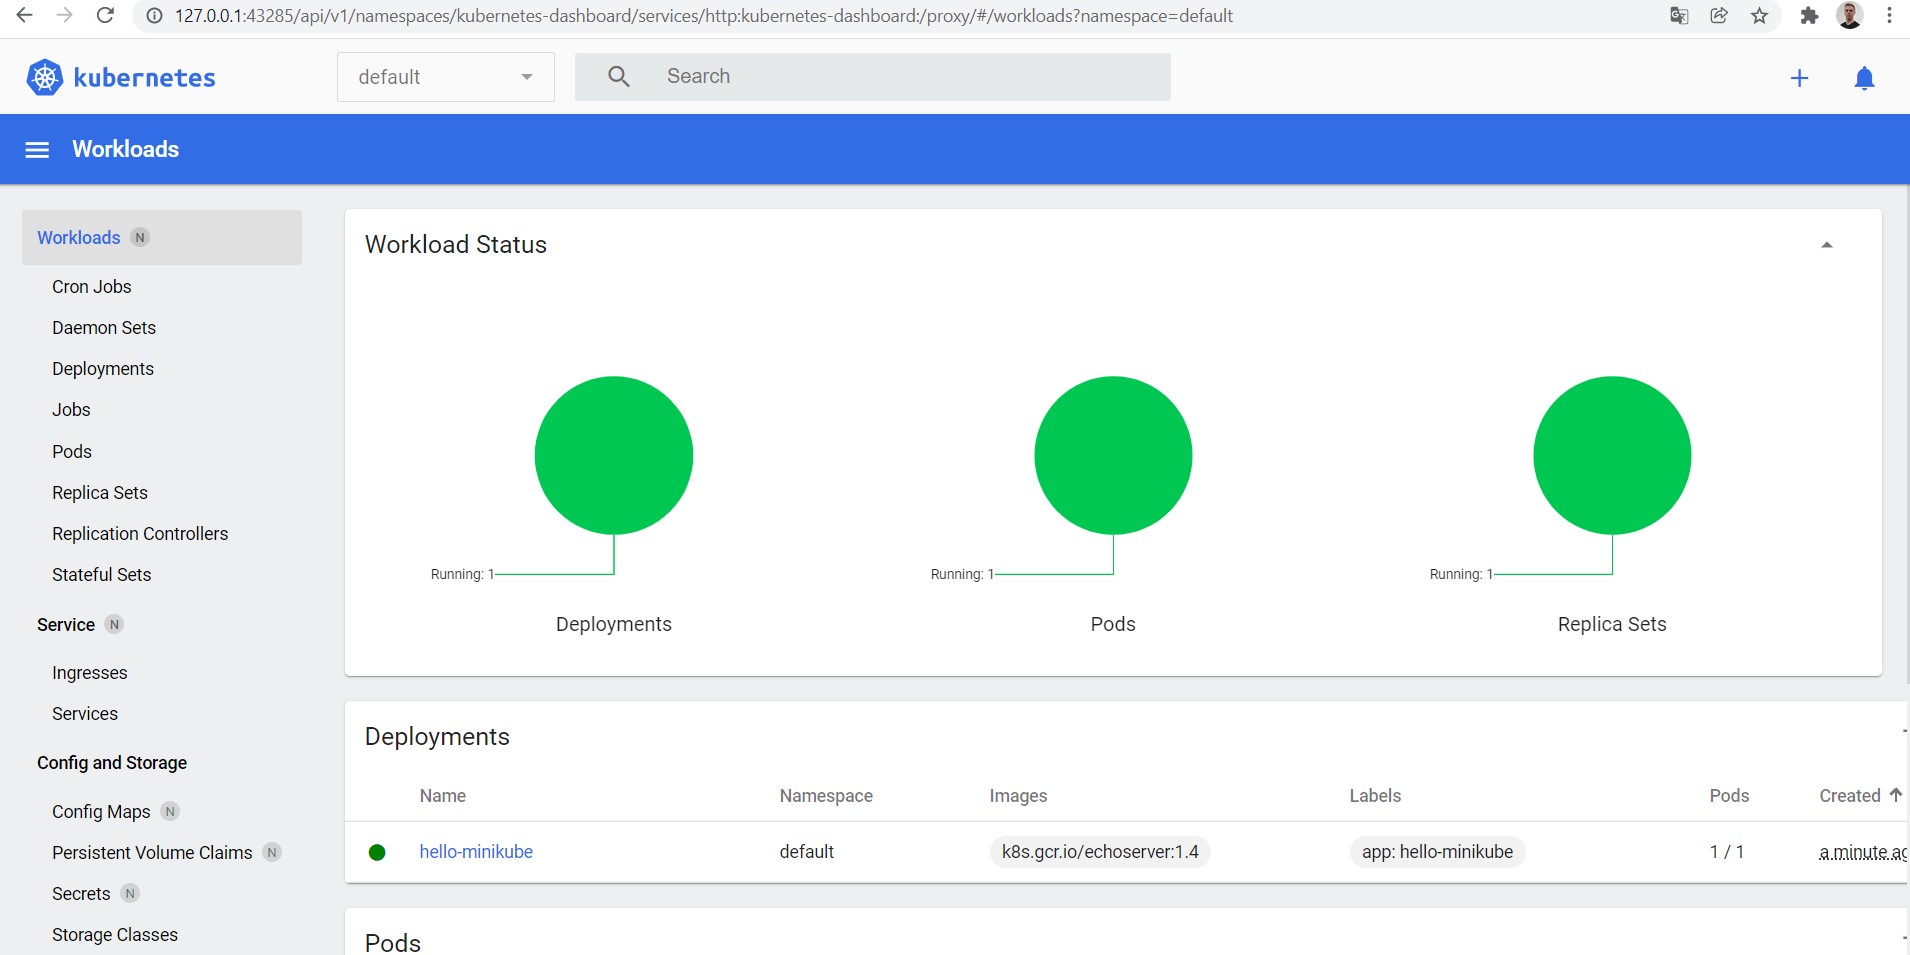 Kubernetes dashboard showing 1 deployment and pod.